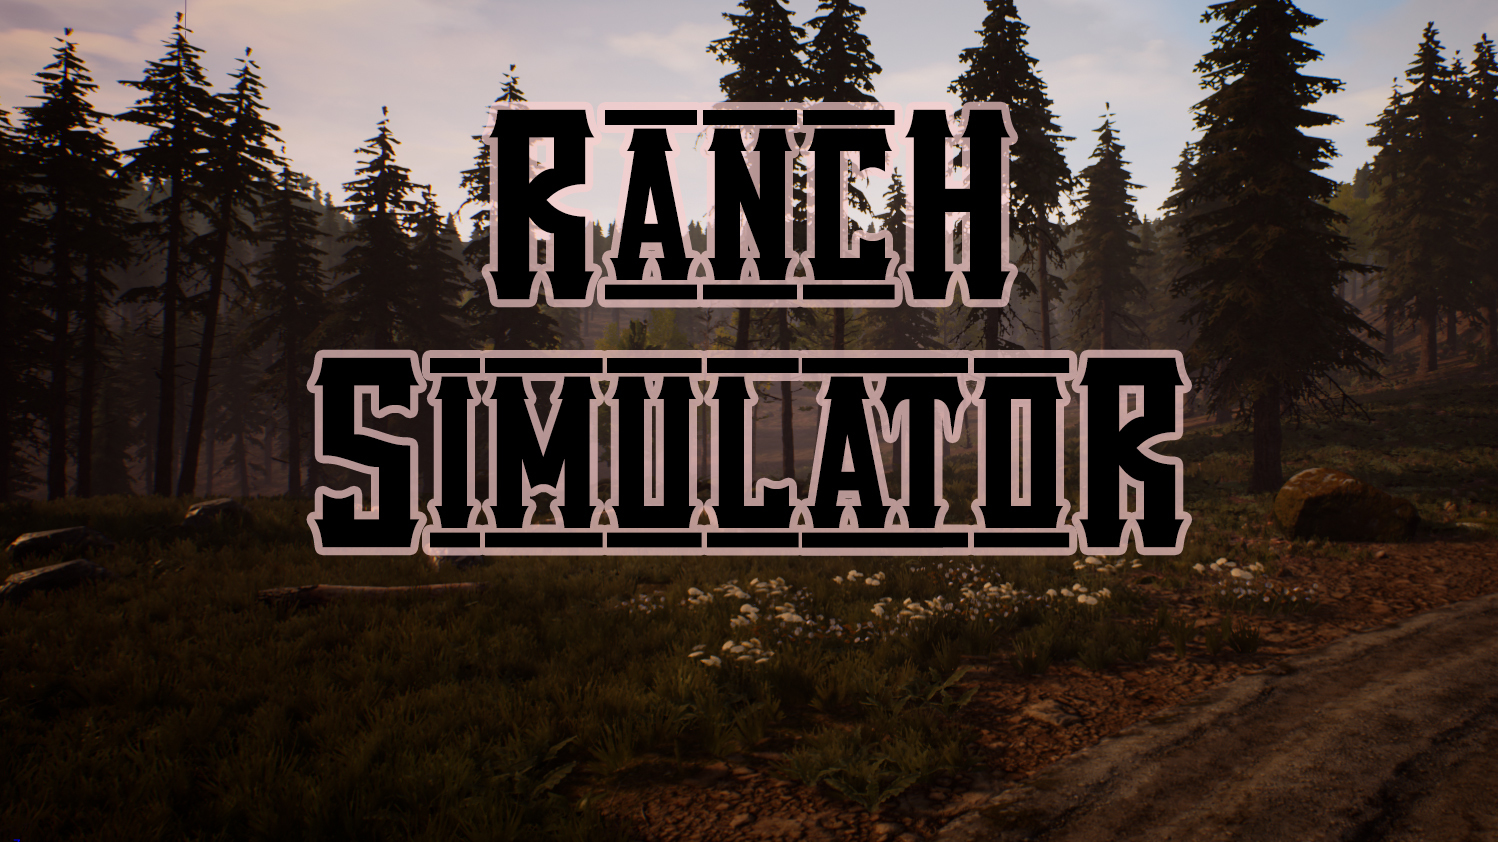 How to download ranch simulator in mobile